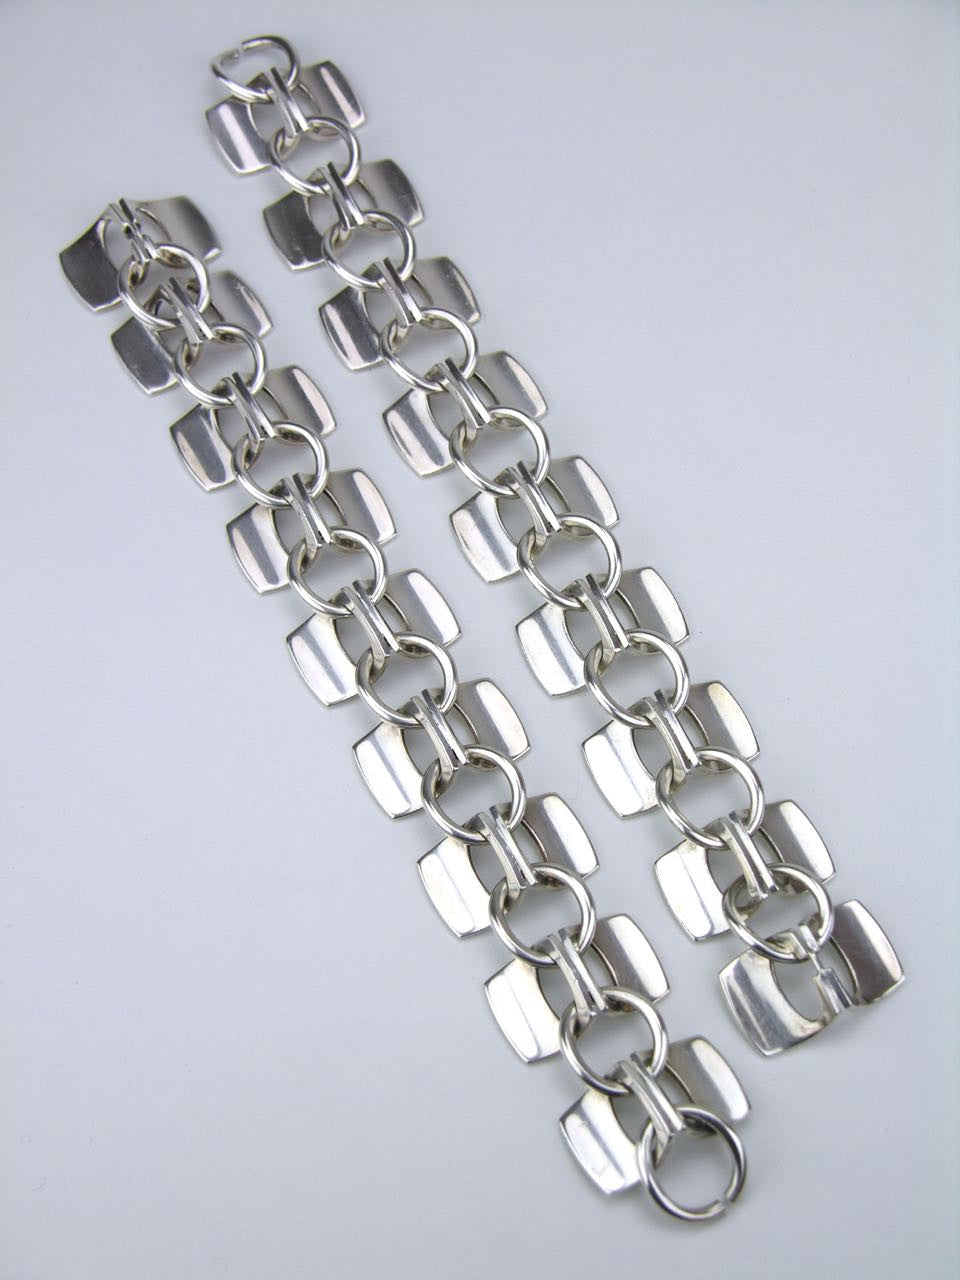 Alton pair of solid silver architectural bracelets that also form a necklace